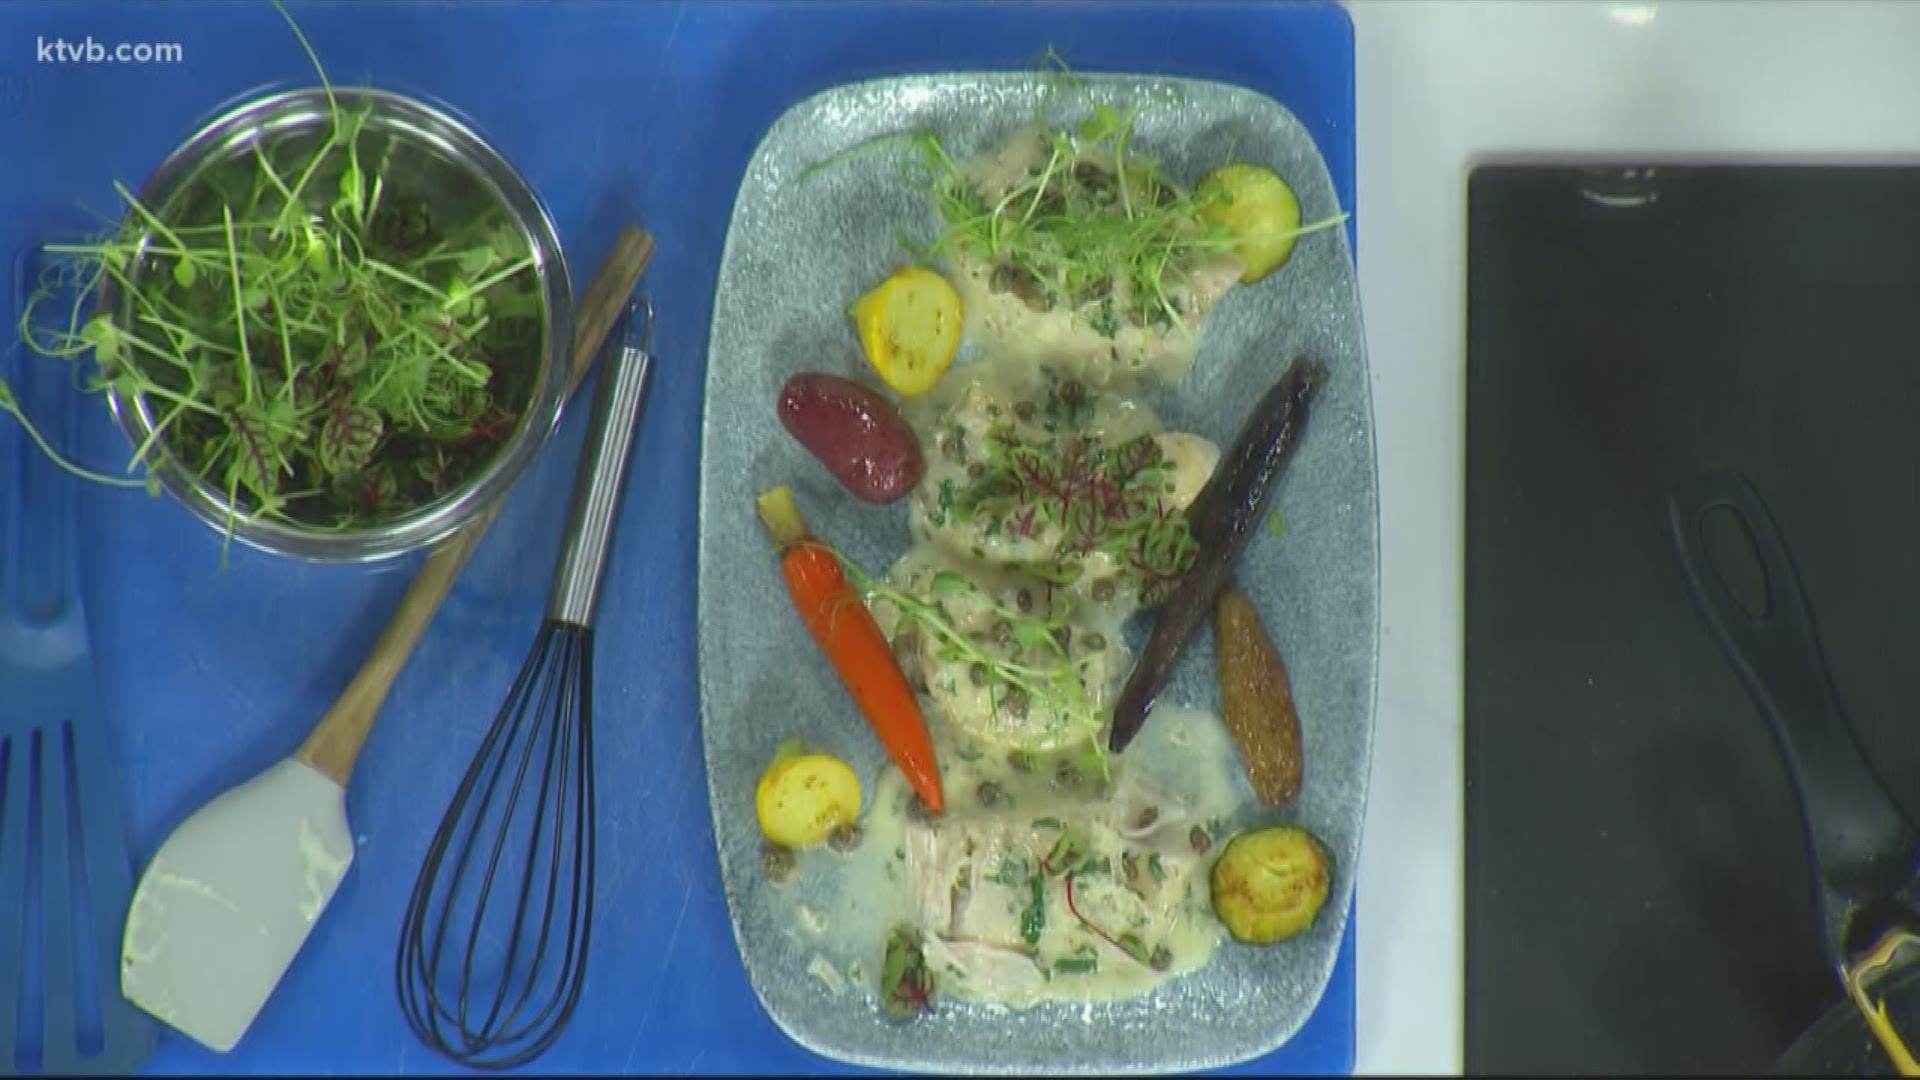 Chef Fanck joins Tami Tremblay and Jim Duthie in the KTVB Kitchen to show how to cook his delicious halibut cheek piccata. For the full recipe, visit KTVB.COM.